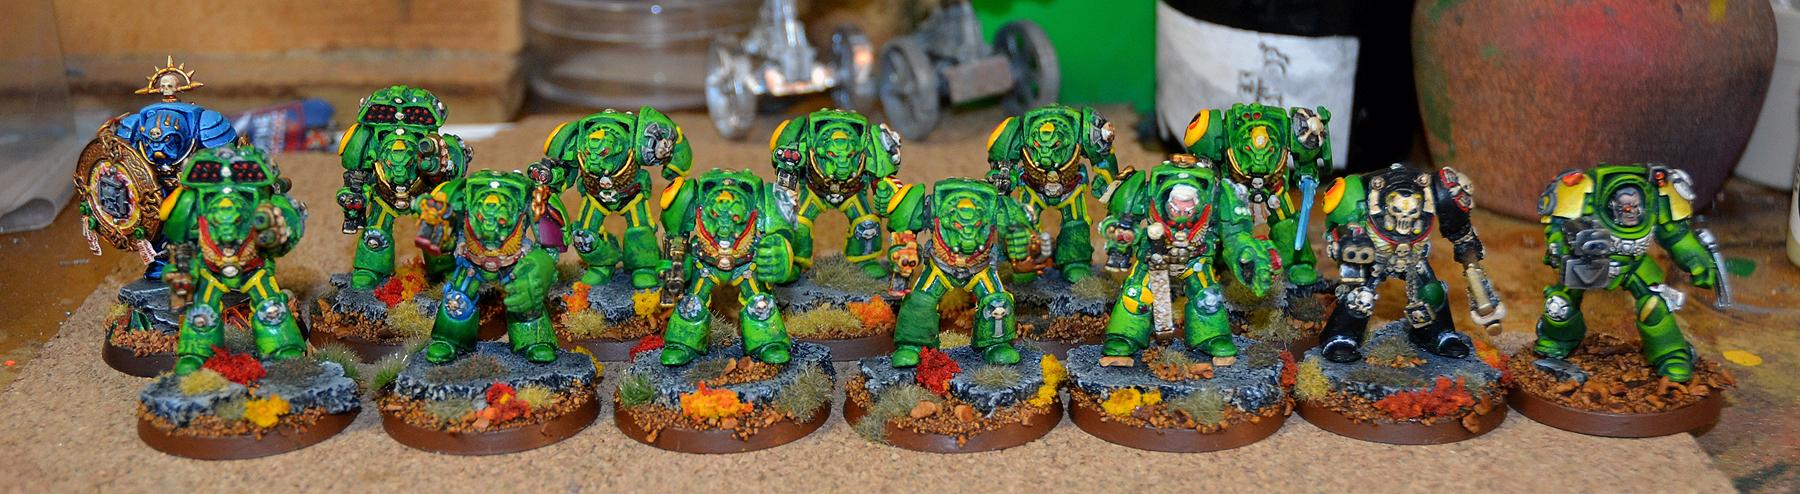 Mantis Warriors, Out Of Production, Space Marines, Terminator Armor, Warhammer 40,000